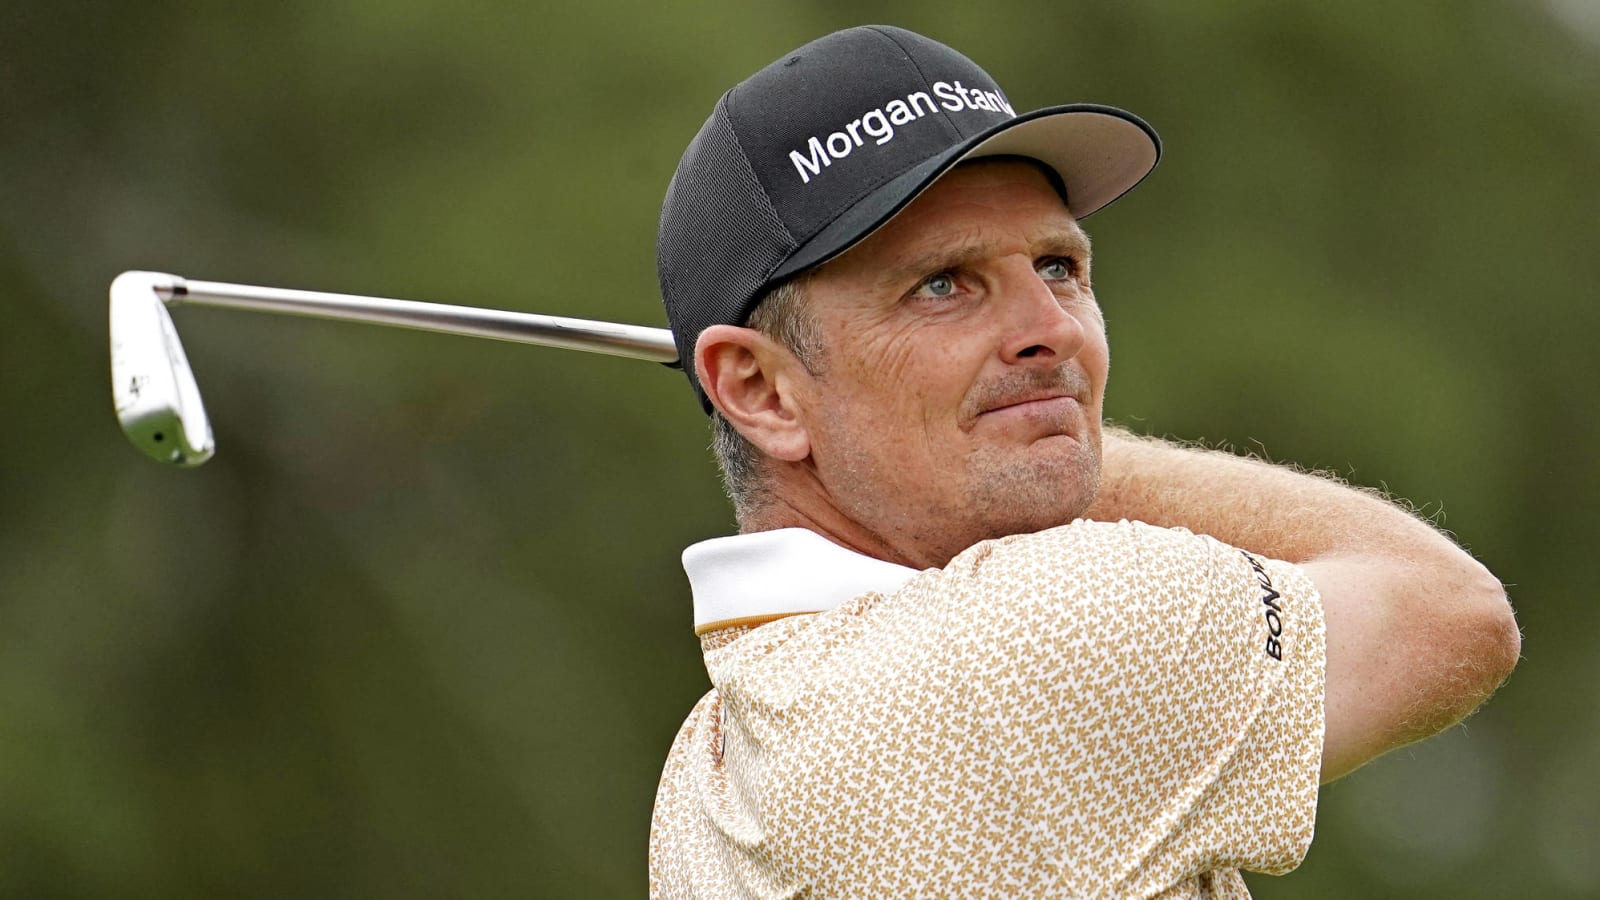 Watch: Justin Rose does funny hip move after saving par